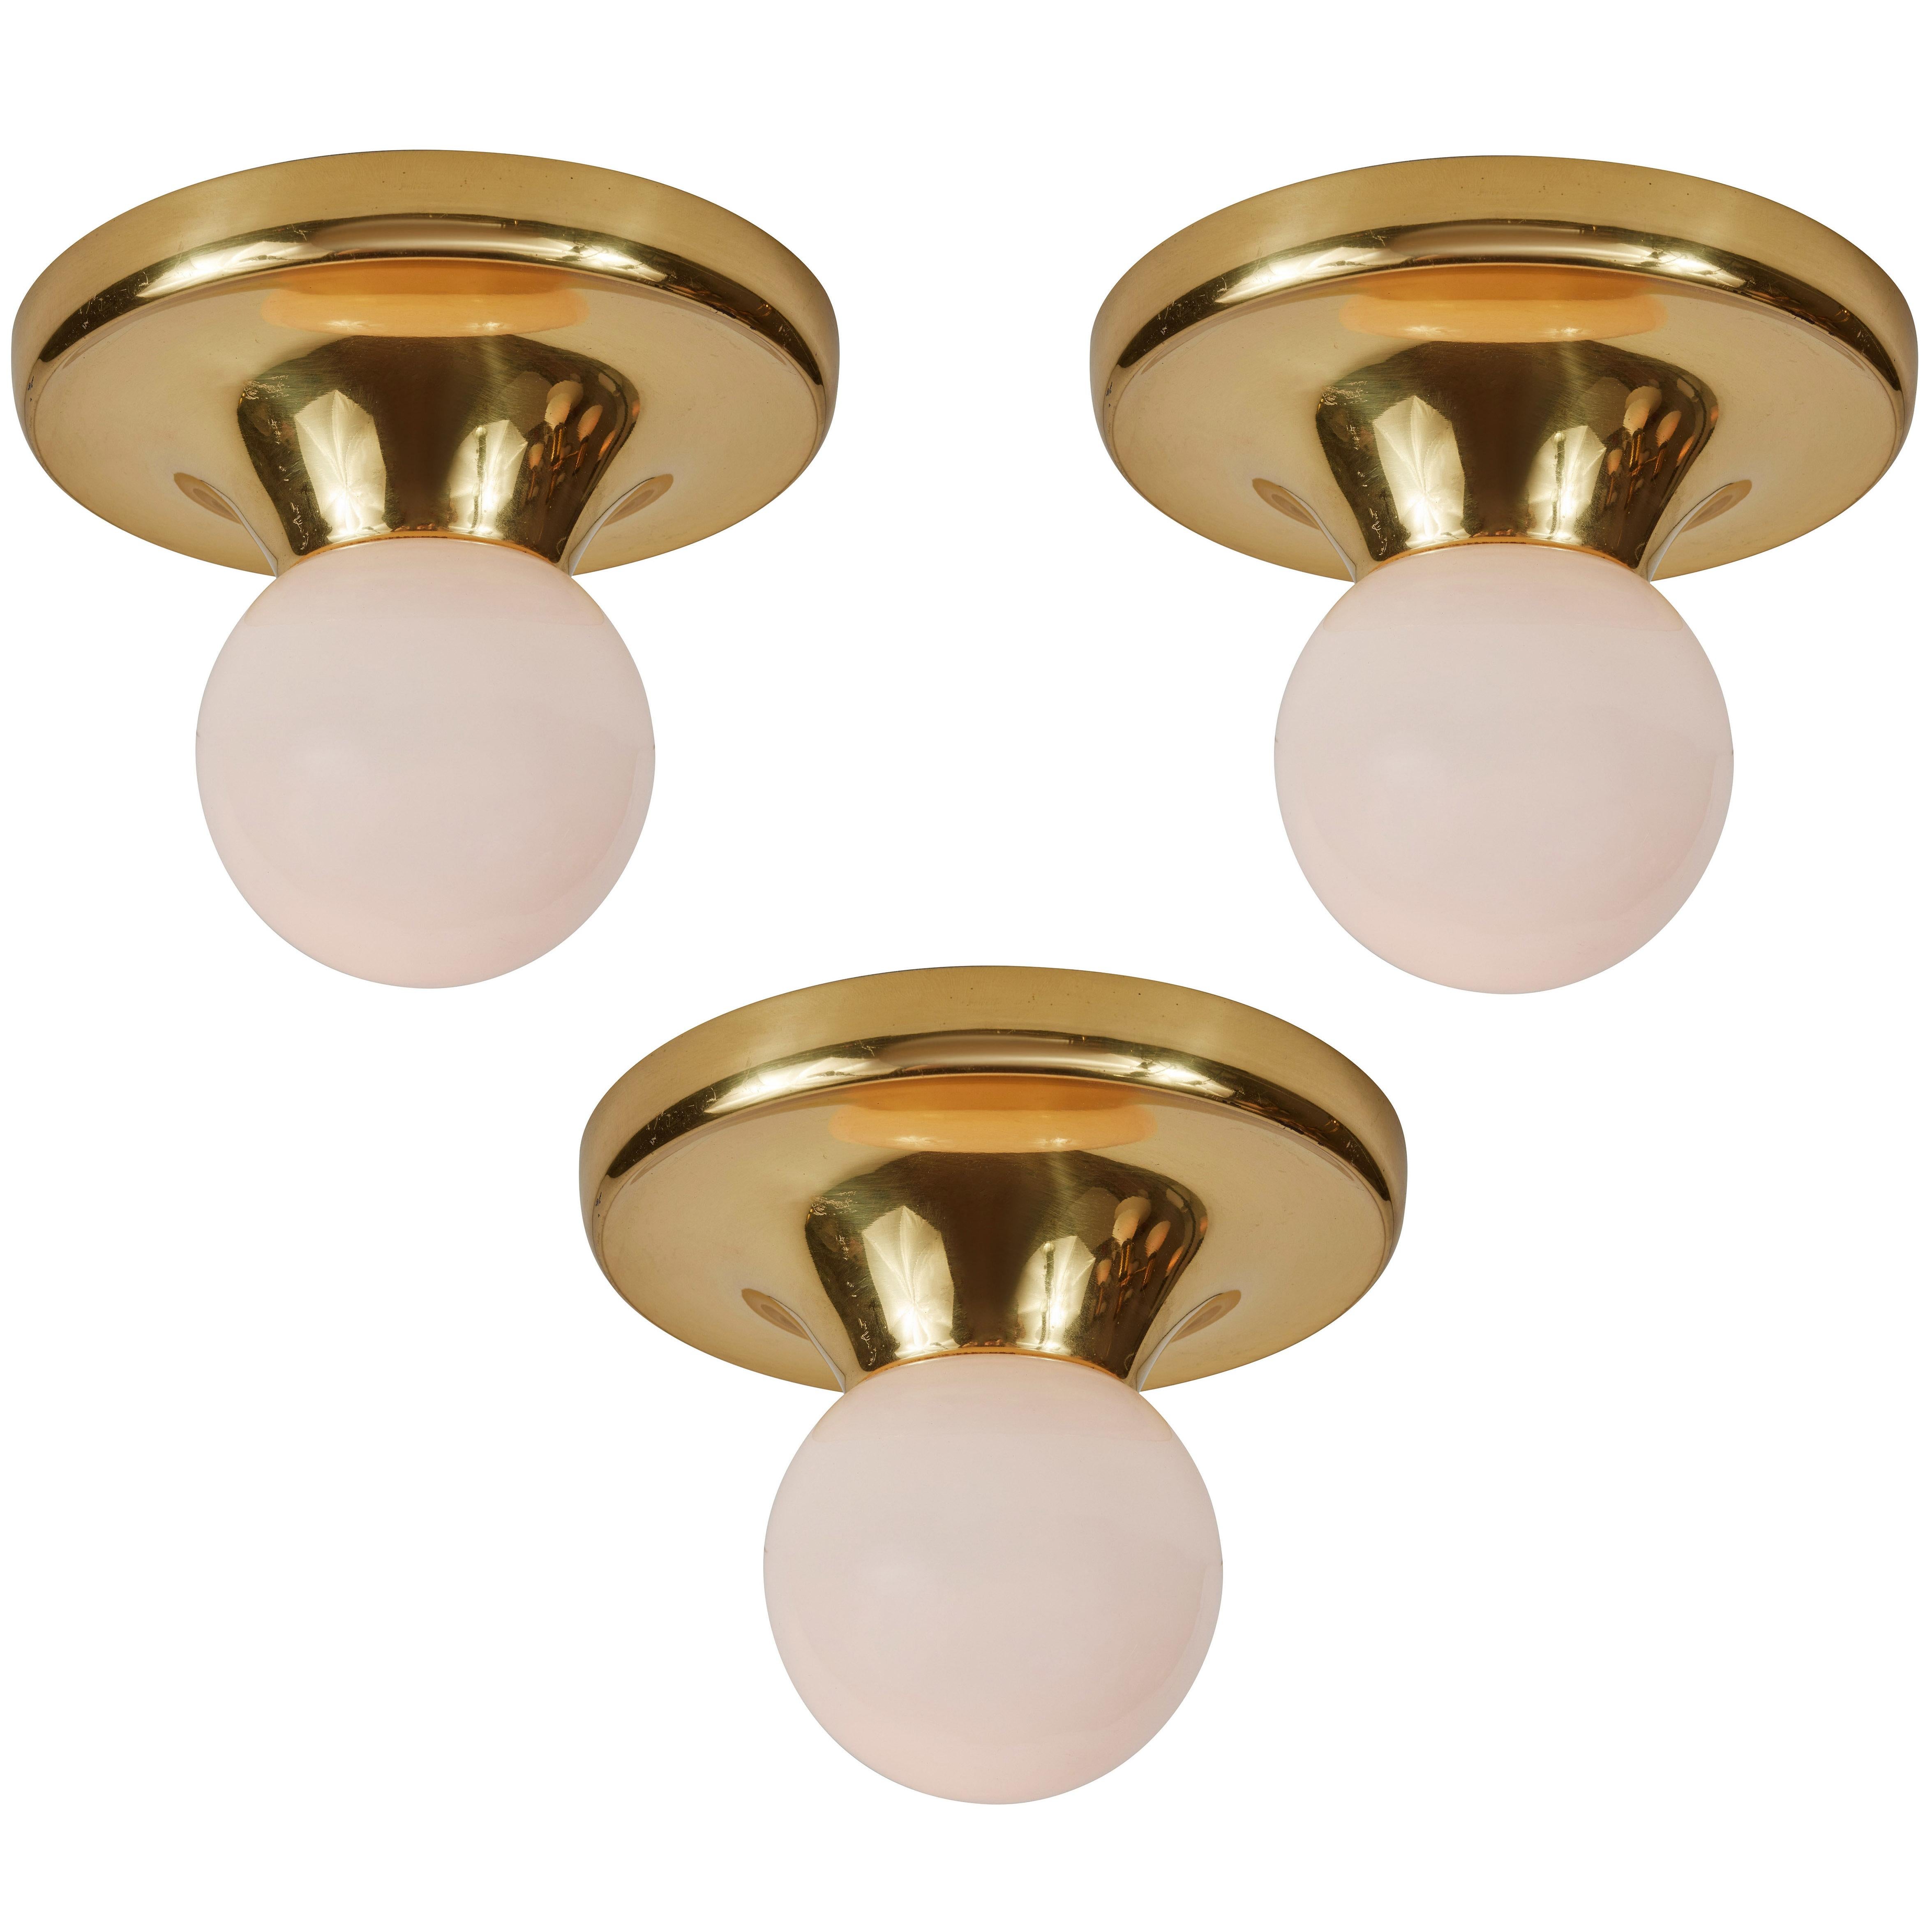 1960s Achille Castiglioni 'Light Ball' wall or ceiling lamp for Flos. Designed in 1965, this rare and vintage brass variant comes with satin opaque glass. An incredibly refined and iconic midcentury design that is quintessentially Italian. This